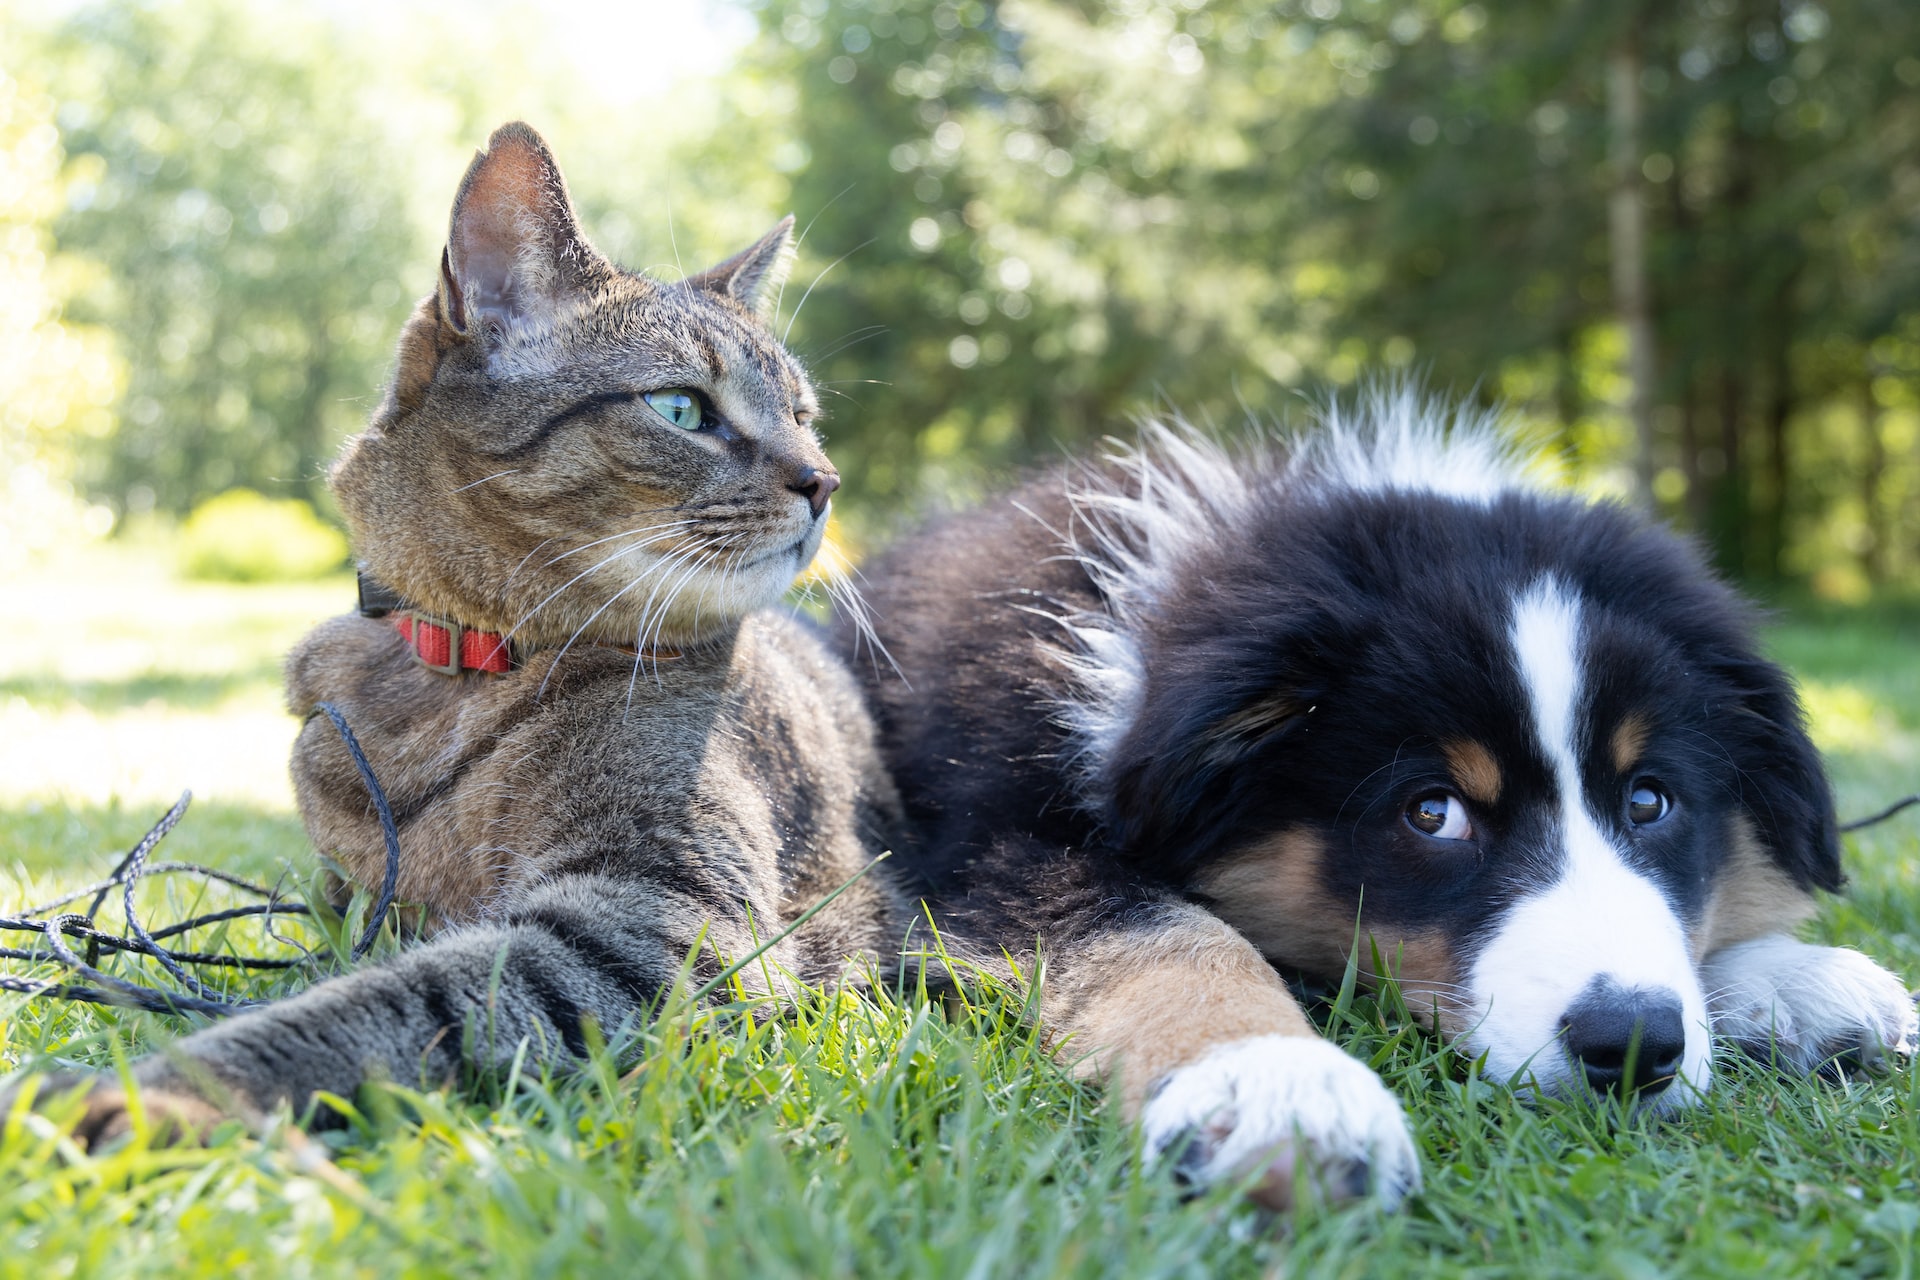 Dog and cat laid together